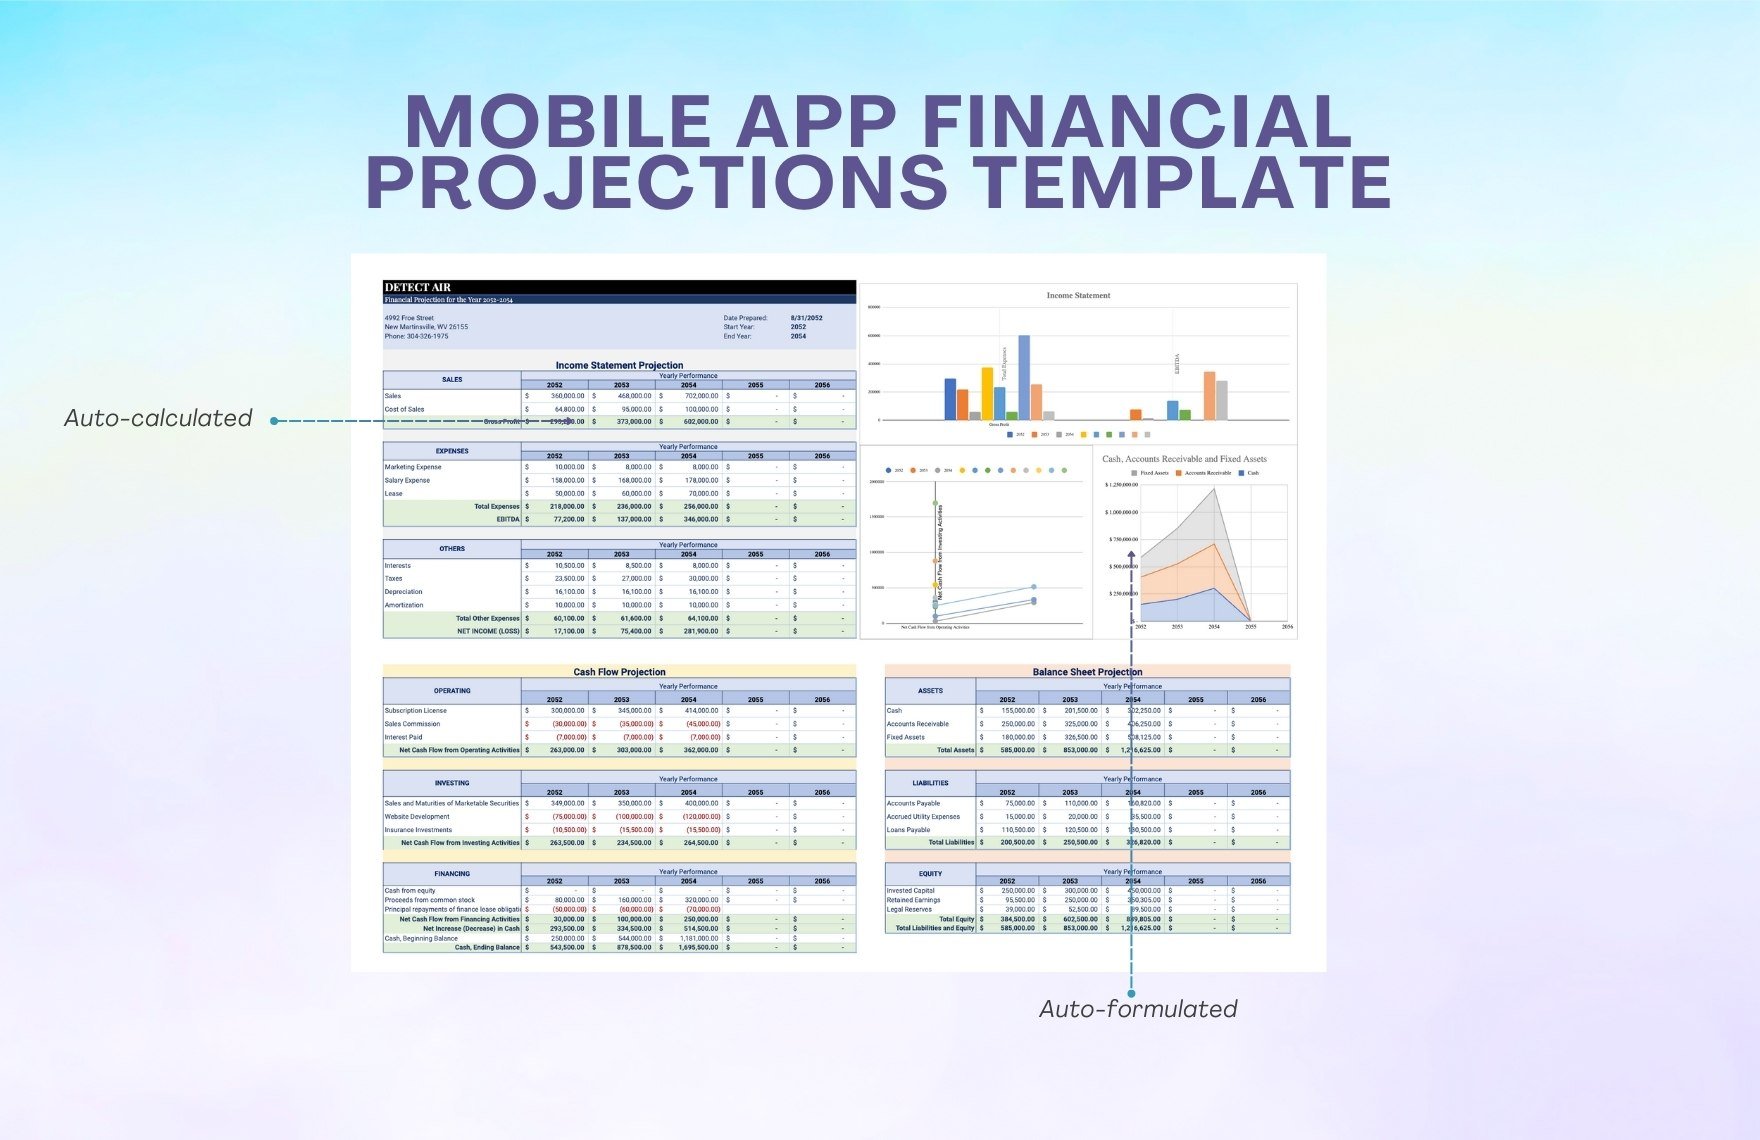 Mobile App Financial Projections Template